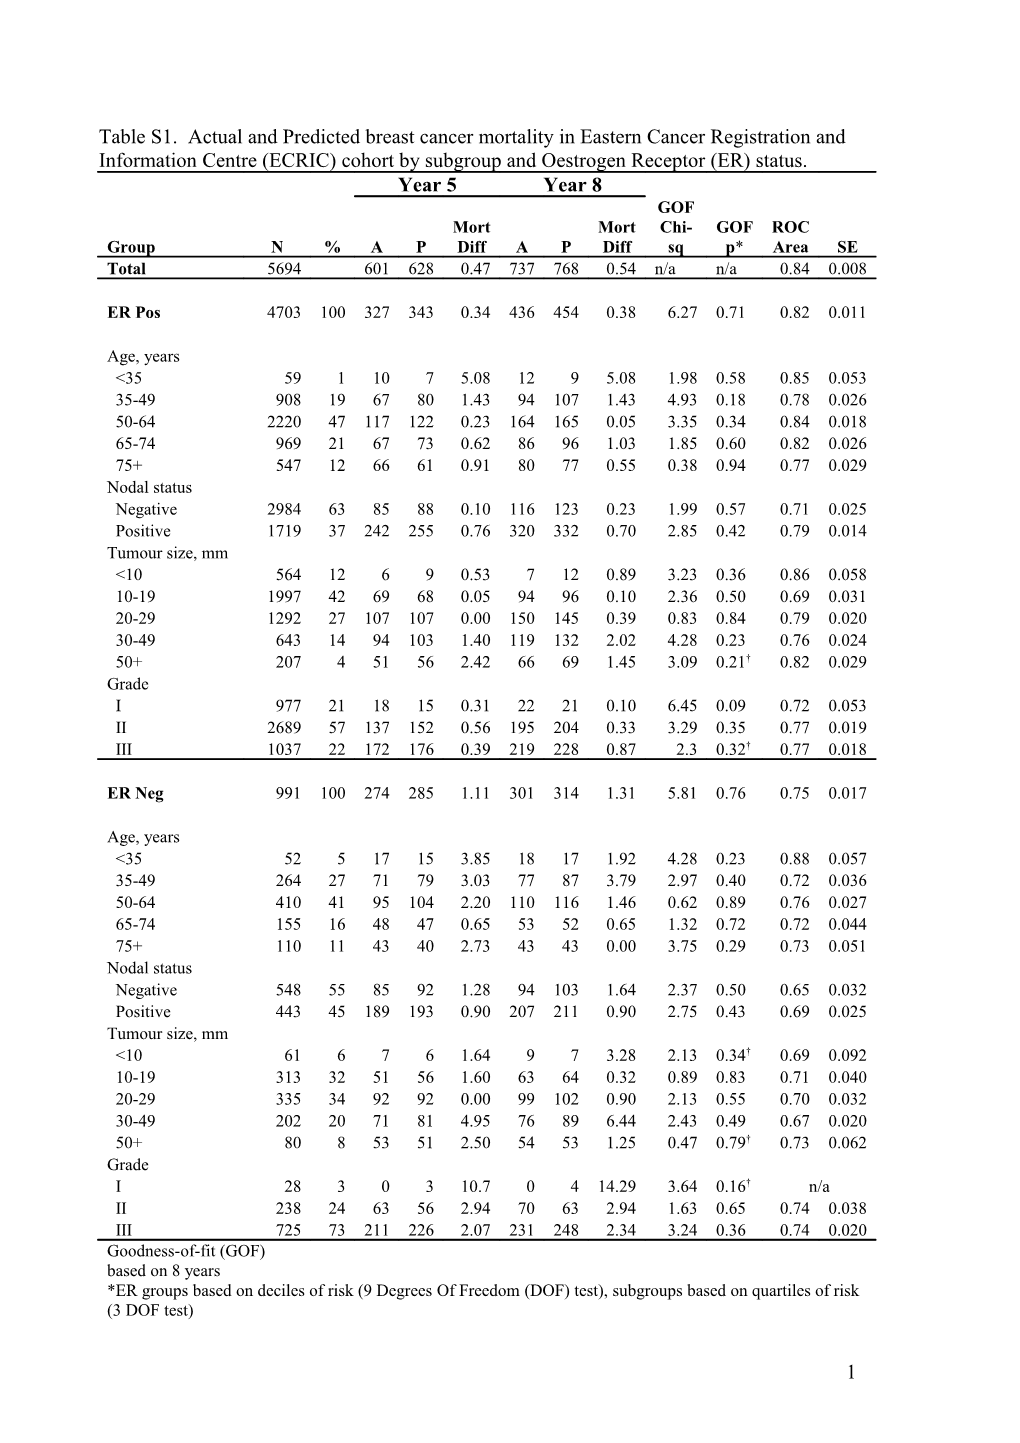 Table S1. Actual and Predicted Breast Cancer Mortality in Eastern Cancer Registration And